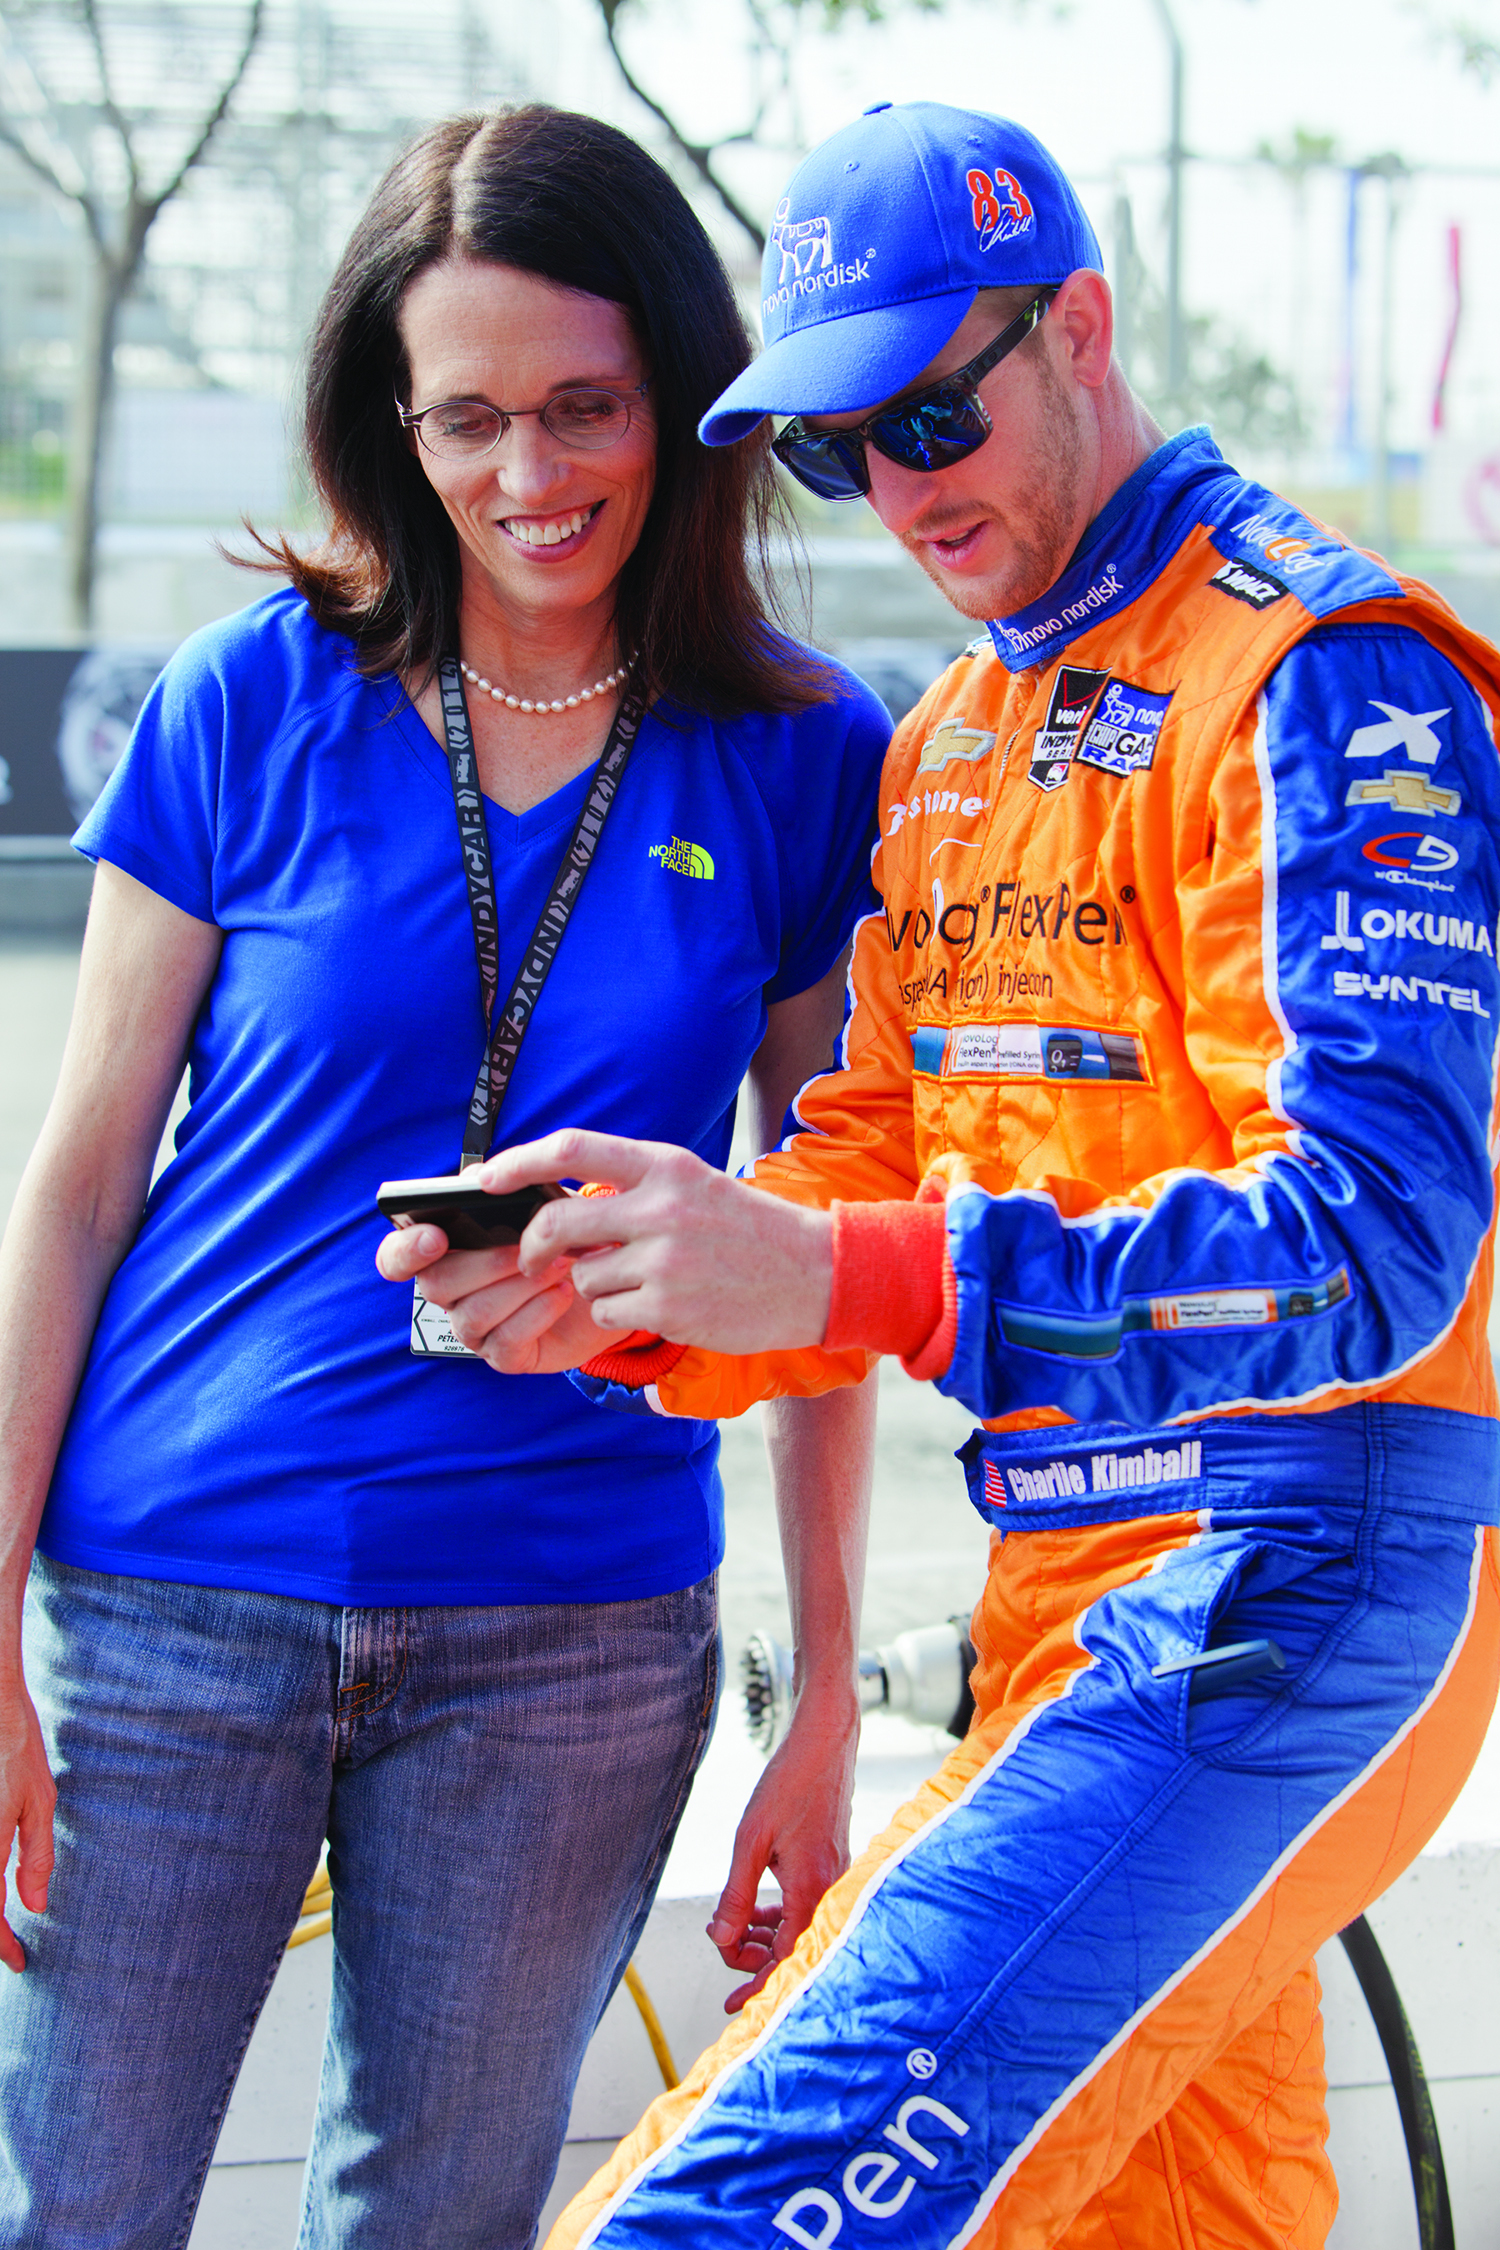 Anne Peters ’79, MD, works with Charlie Kimball at the Long Beach Grand Prix in April 2014, reviewing Kimball’s blood sugar readings on his continuous glucose monitor. The monitor is mounted on the dash of his IndyCar and the readings are transmitted back to the pit to confirm that his blood sugar is in the safe range for him to drive. Diagnosed with Type I diabetes in 2007, Kimball is now the driver for Novo Nordisk Chip Ganassi Racing in the Verizon IndyCar Series. 